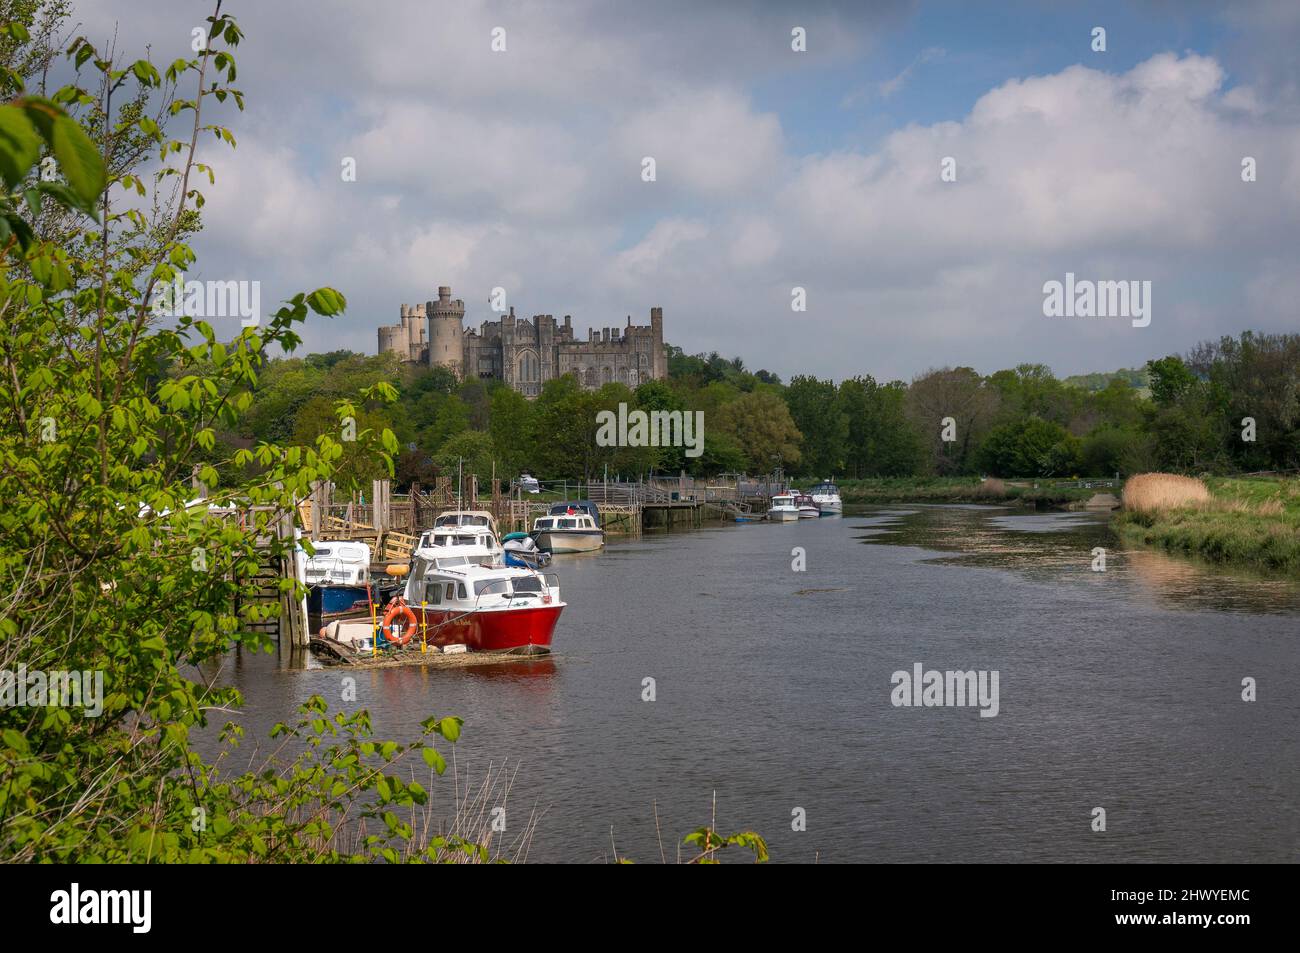 Boats on the River Arun with Arundel Castle in the background, West Sussex, UK Stock Photo